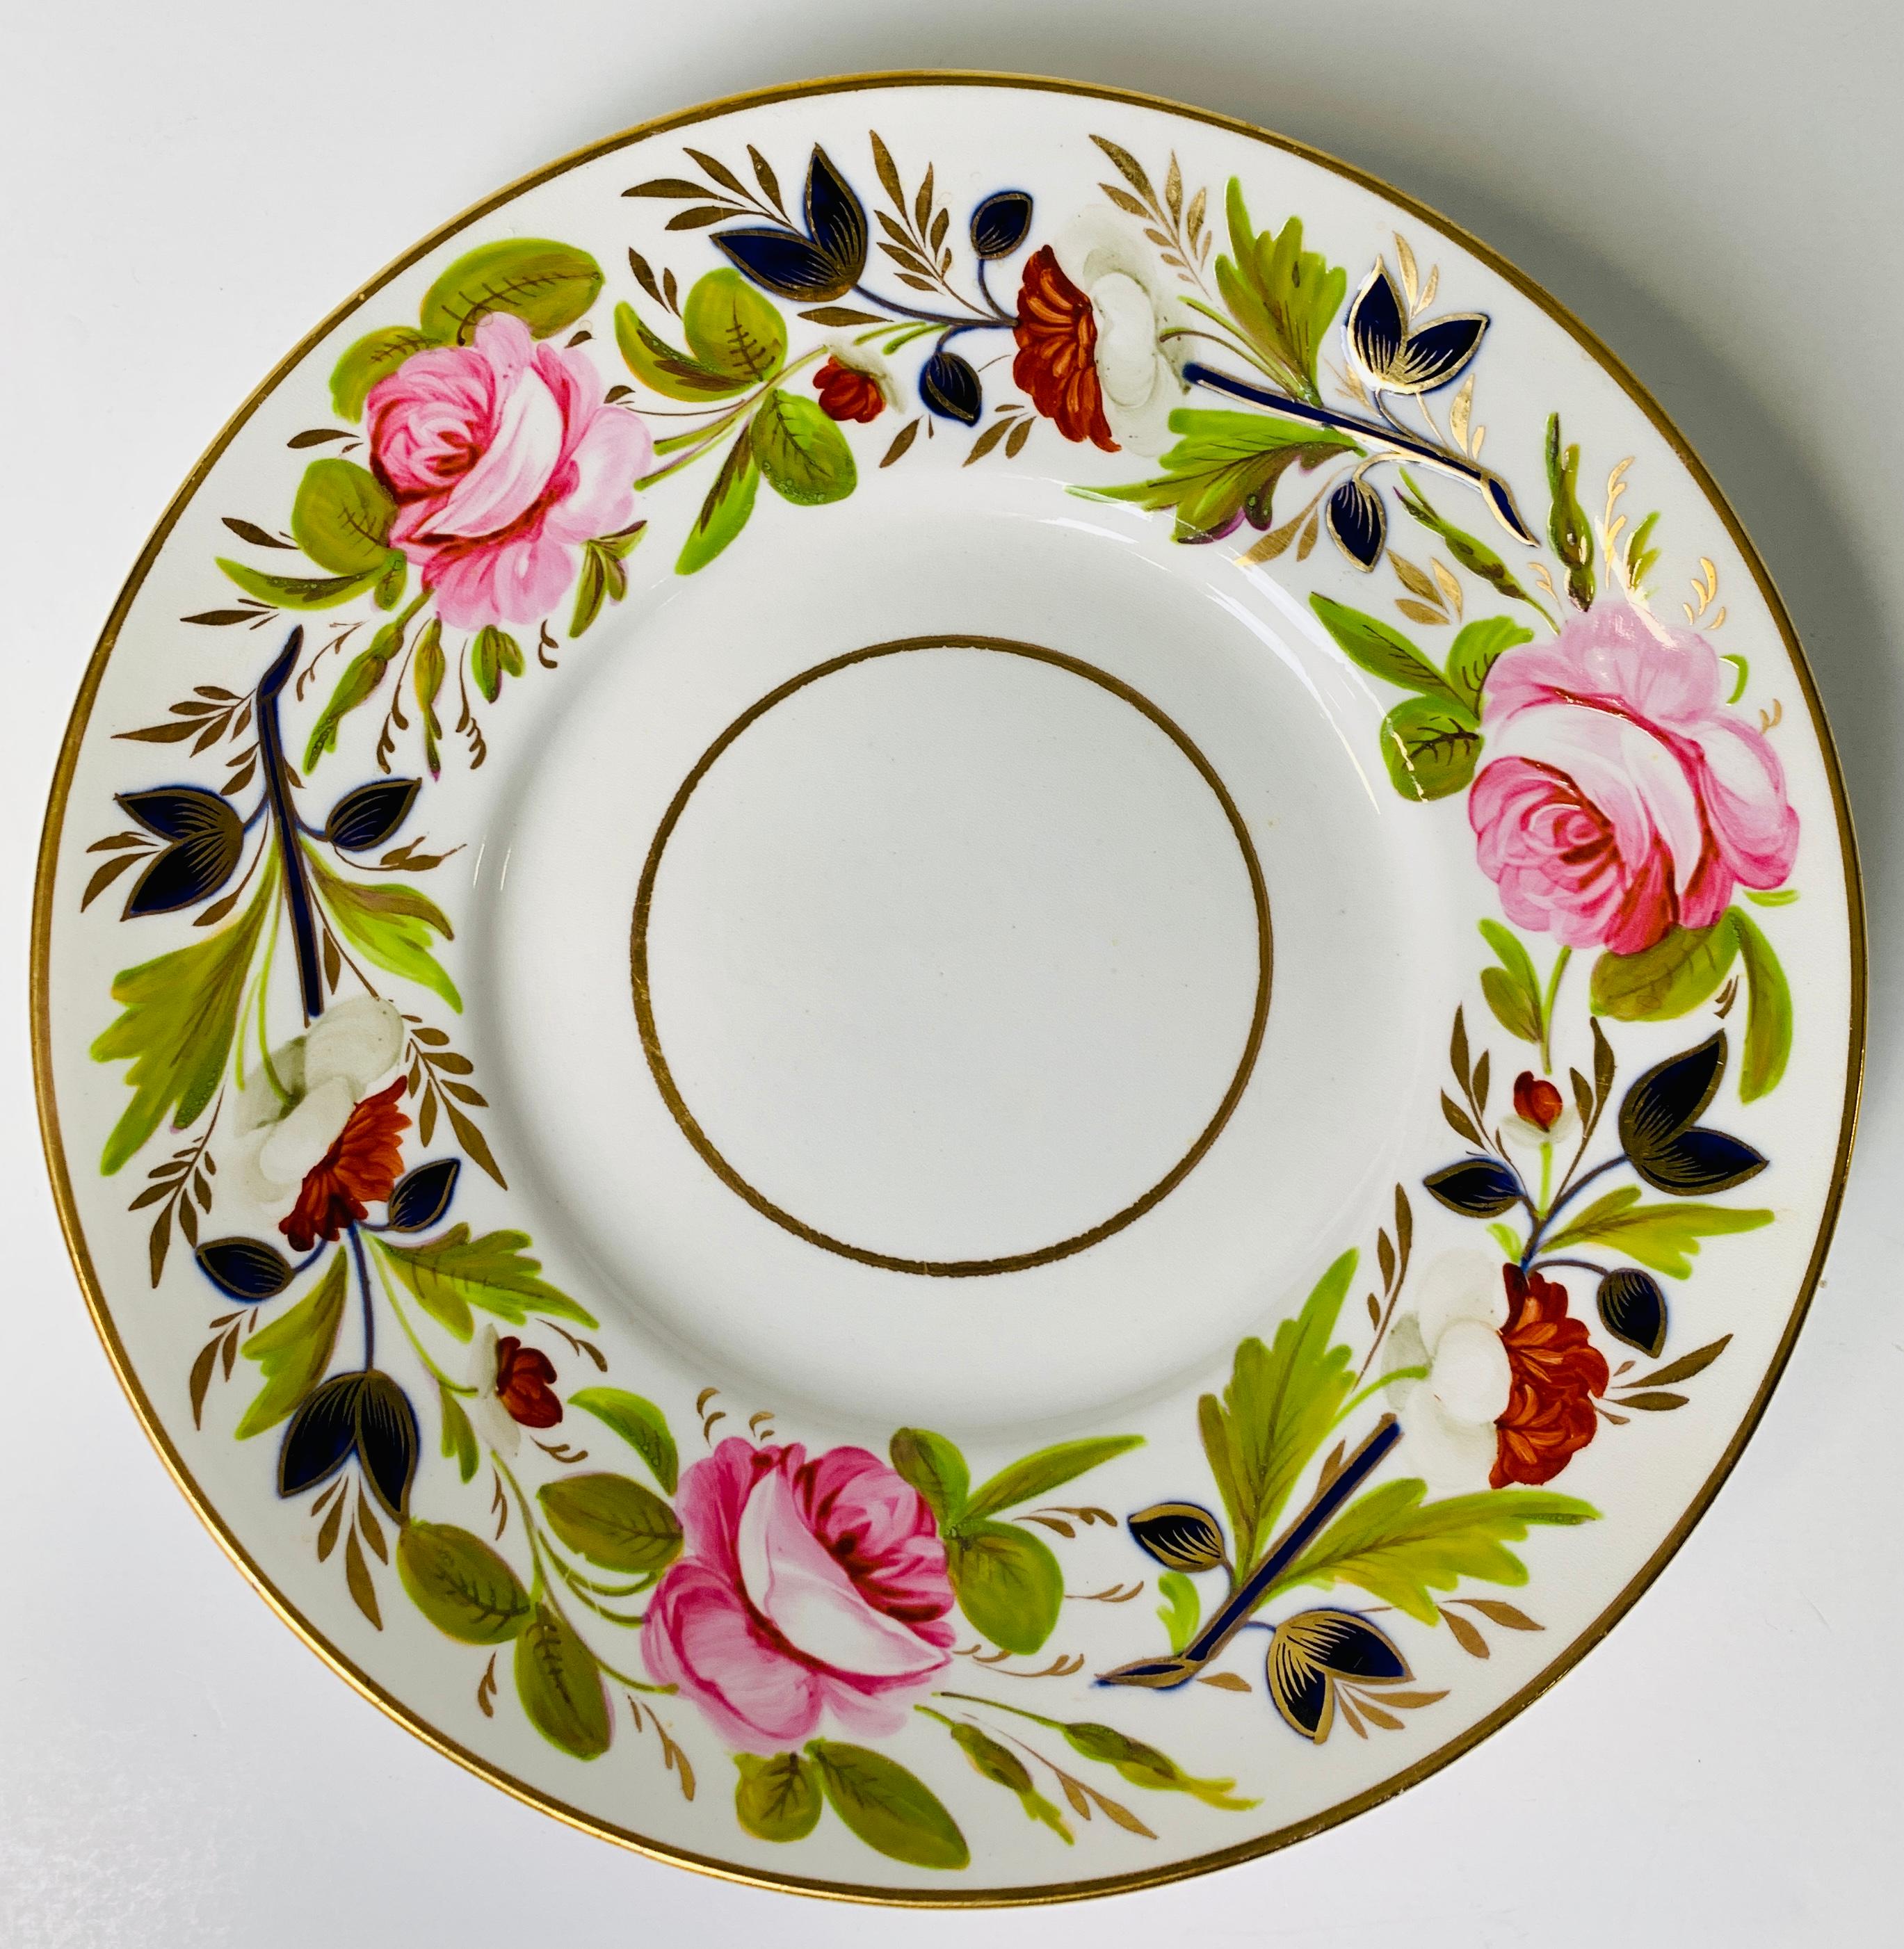 A pair of Antique English porcelain dishes hand-painted with beautiful pink peonies and other flowers were made in England circa 1830.
Placed by the front door, this lovely pair of dishes would give you and anyone walking into your home a cheerful